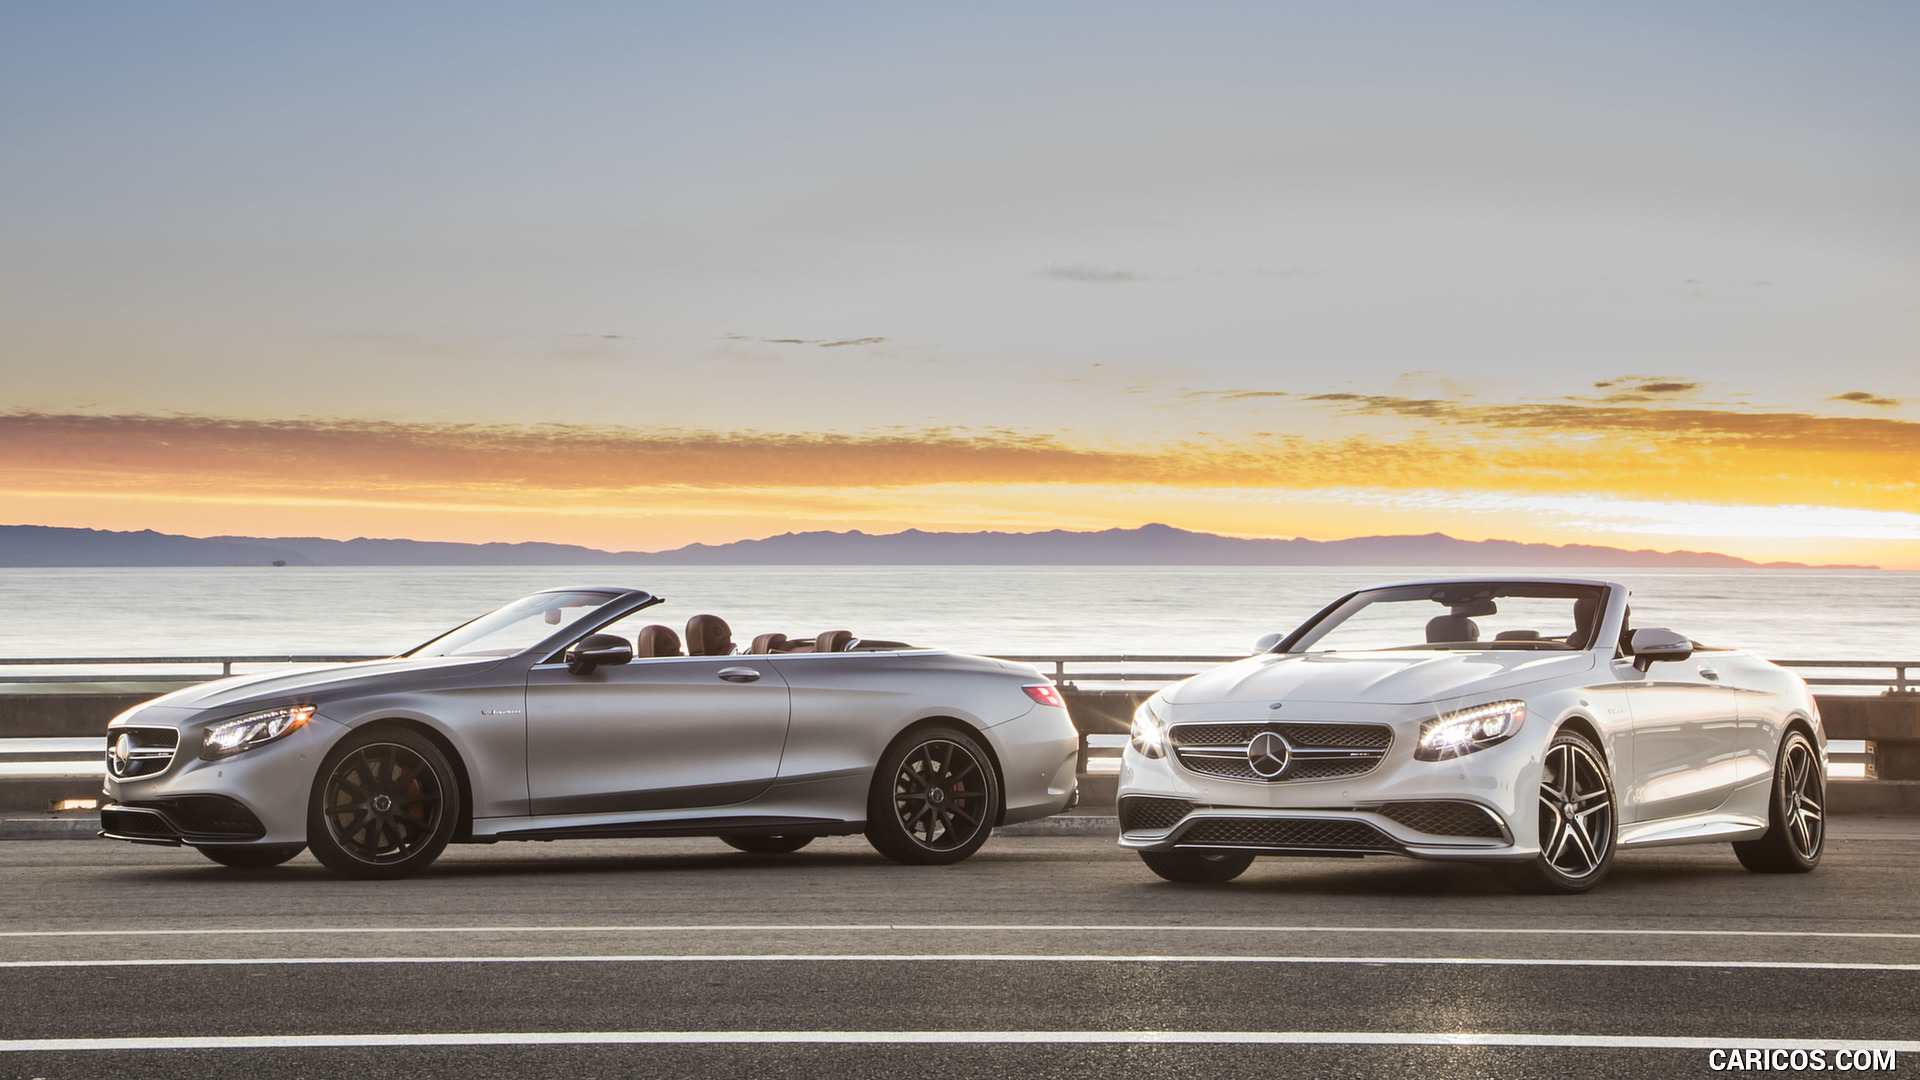 2017 Mercedes-AMG S63 Cabriolet (US-Spec) and S65 AMG Cabriolet, #64 of 65